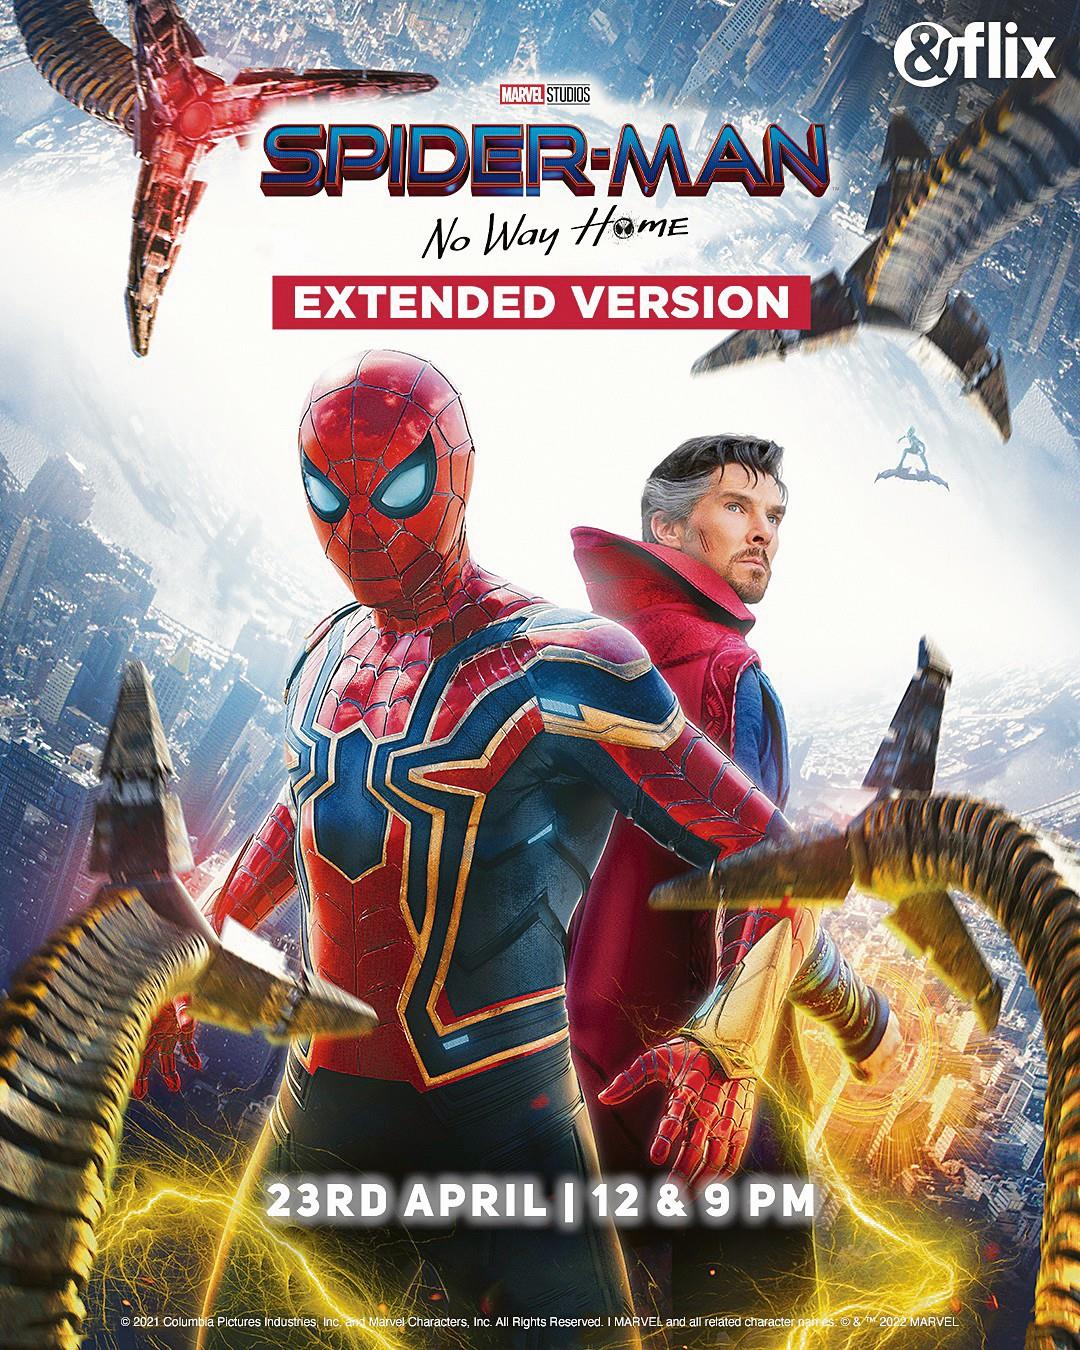 andflix to stream Spiderman No Way Home Extended Cut on April 23 The Tribune India